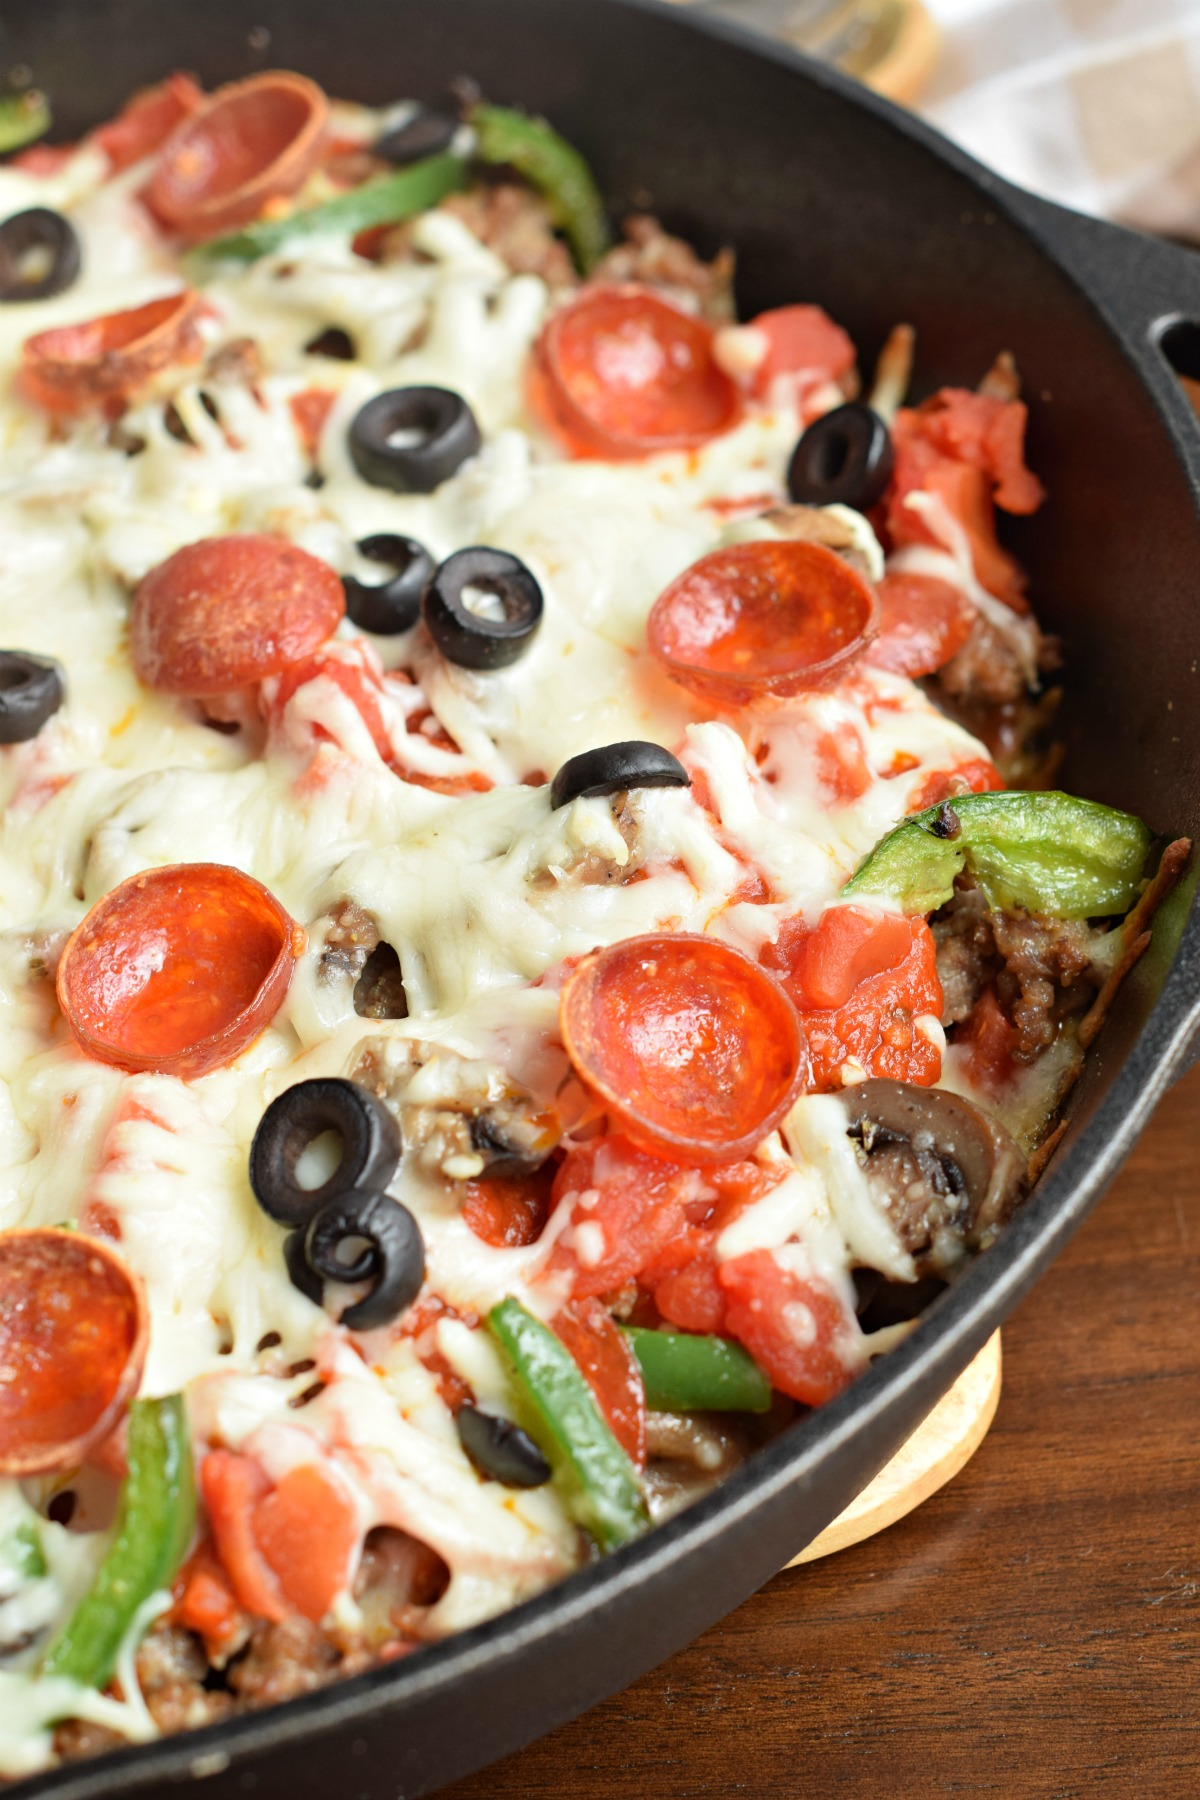 Cast iron skillet with supreme pizza toppings and no crust.